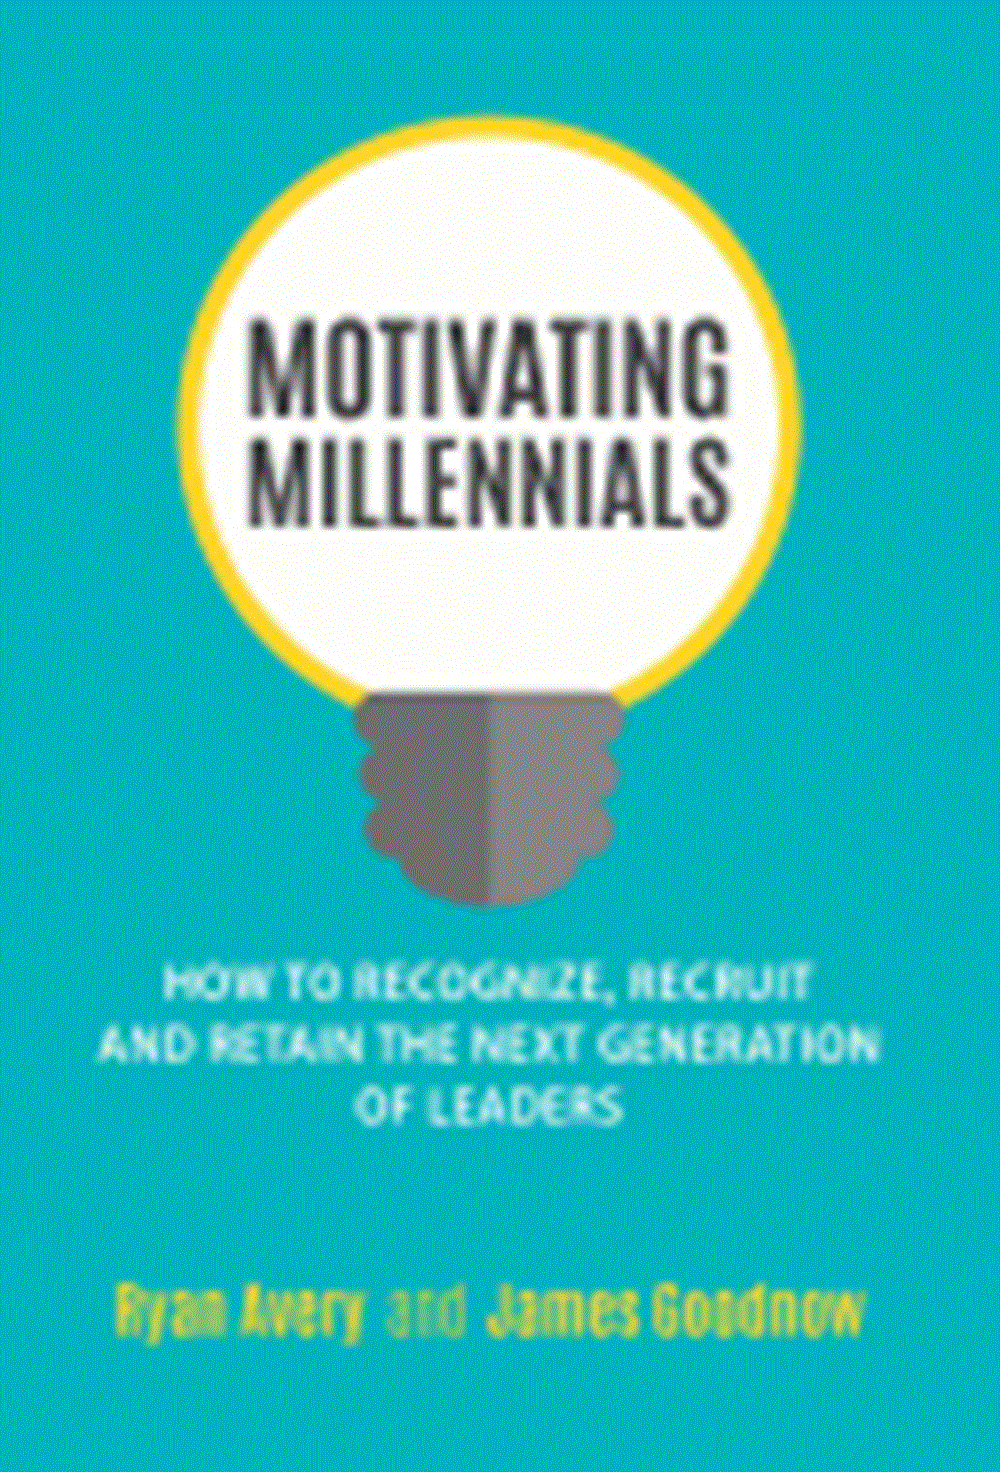 Motivating Millennials How to Recognize, Recruit and Retain the Next Generation of Leaders